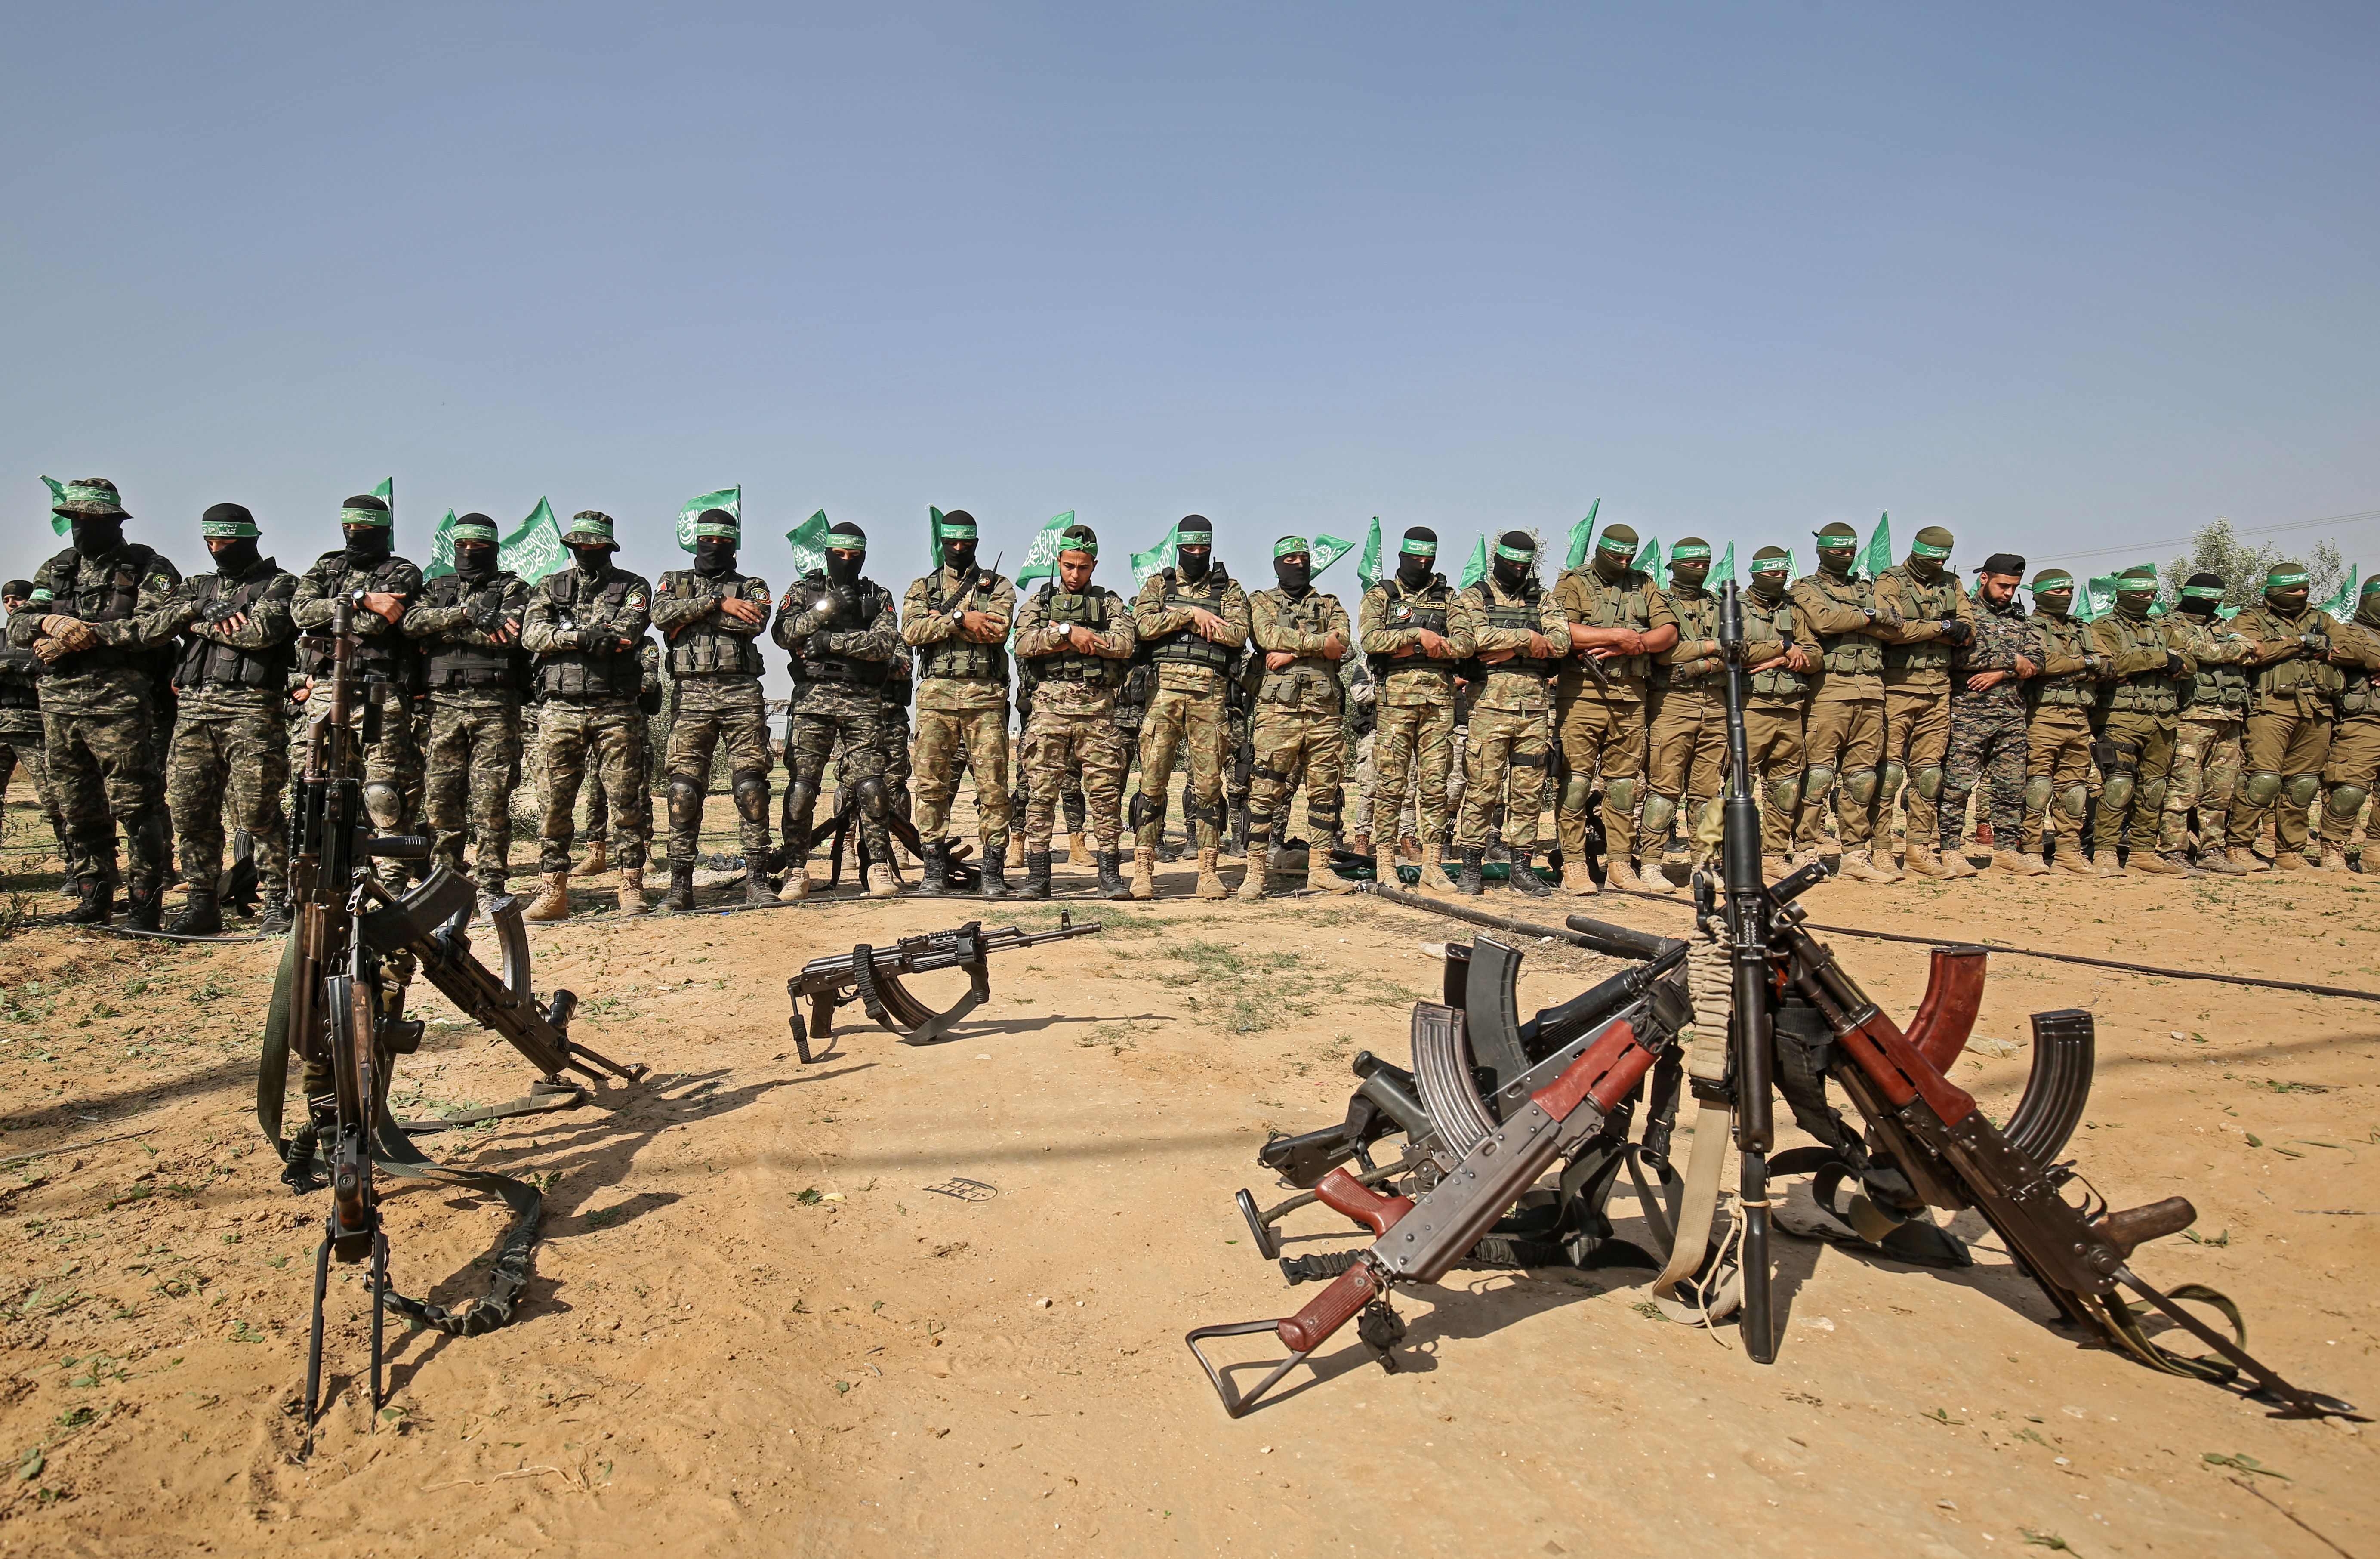 Fighters from the Ezz-Al Din Al-Qassam Brigades, the armed wing of the Palestinian Hamas movement, pray together during an anti-Israel military show in Khan Yunis in the southern Gaza Strip November 11, 2019 to mark one year since their comrade Nour Baraka, a commander in the group, was killed in an Israeli military operation in the Gaza Strip. (SAID KHATIB/AFP via Getty Images)